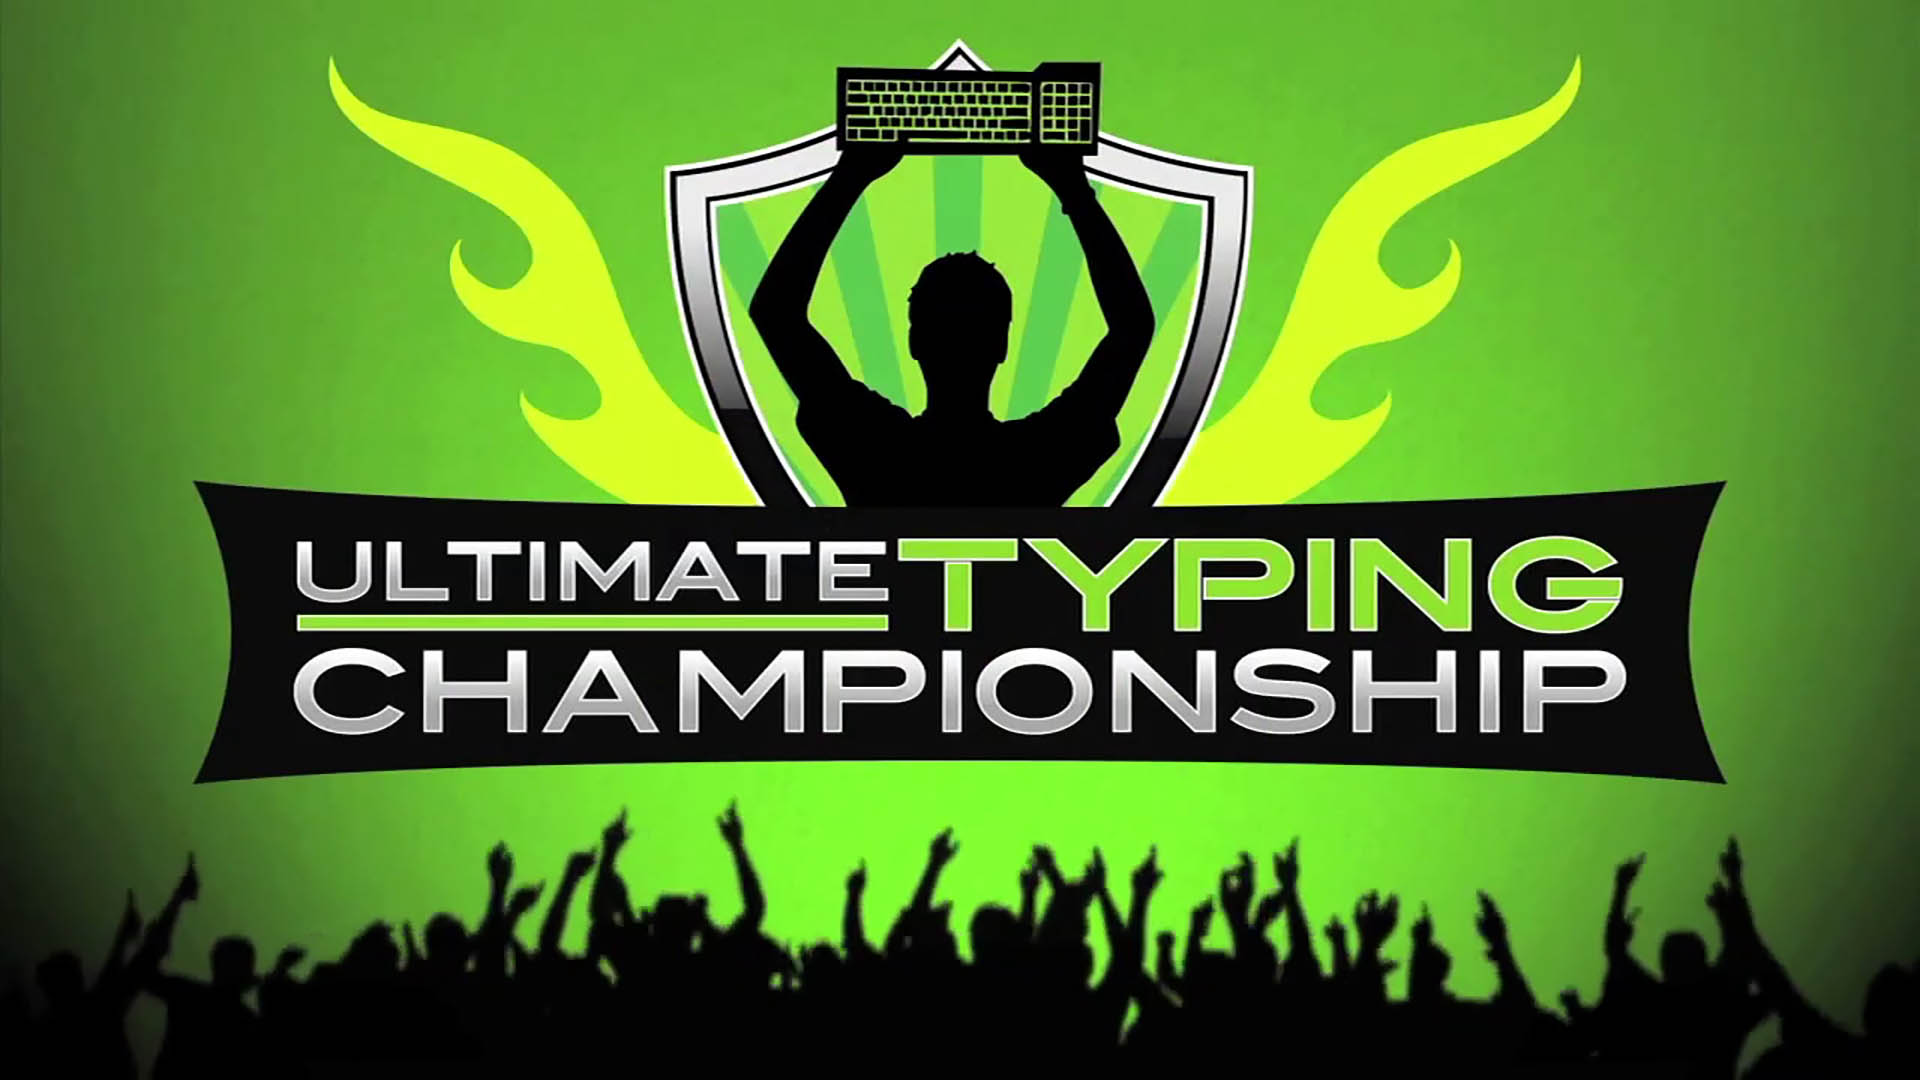  Watch this 'inhuman' typist take the ultimate typing crown at 208.5WPM 